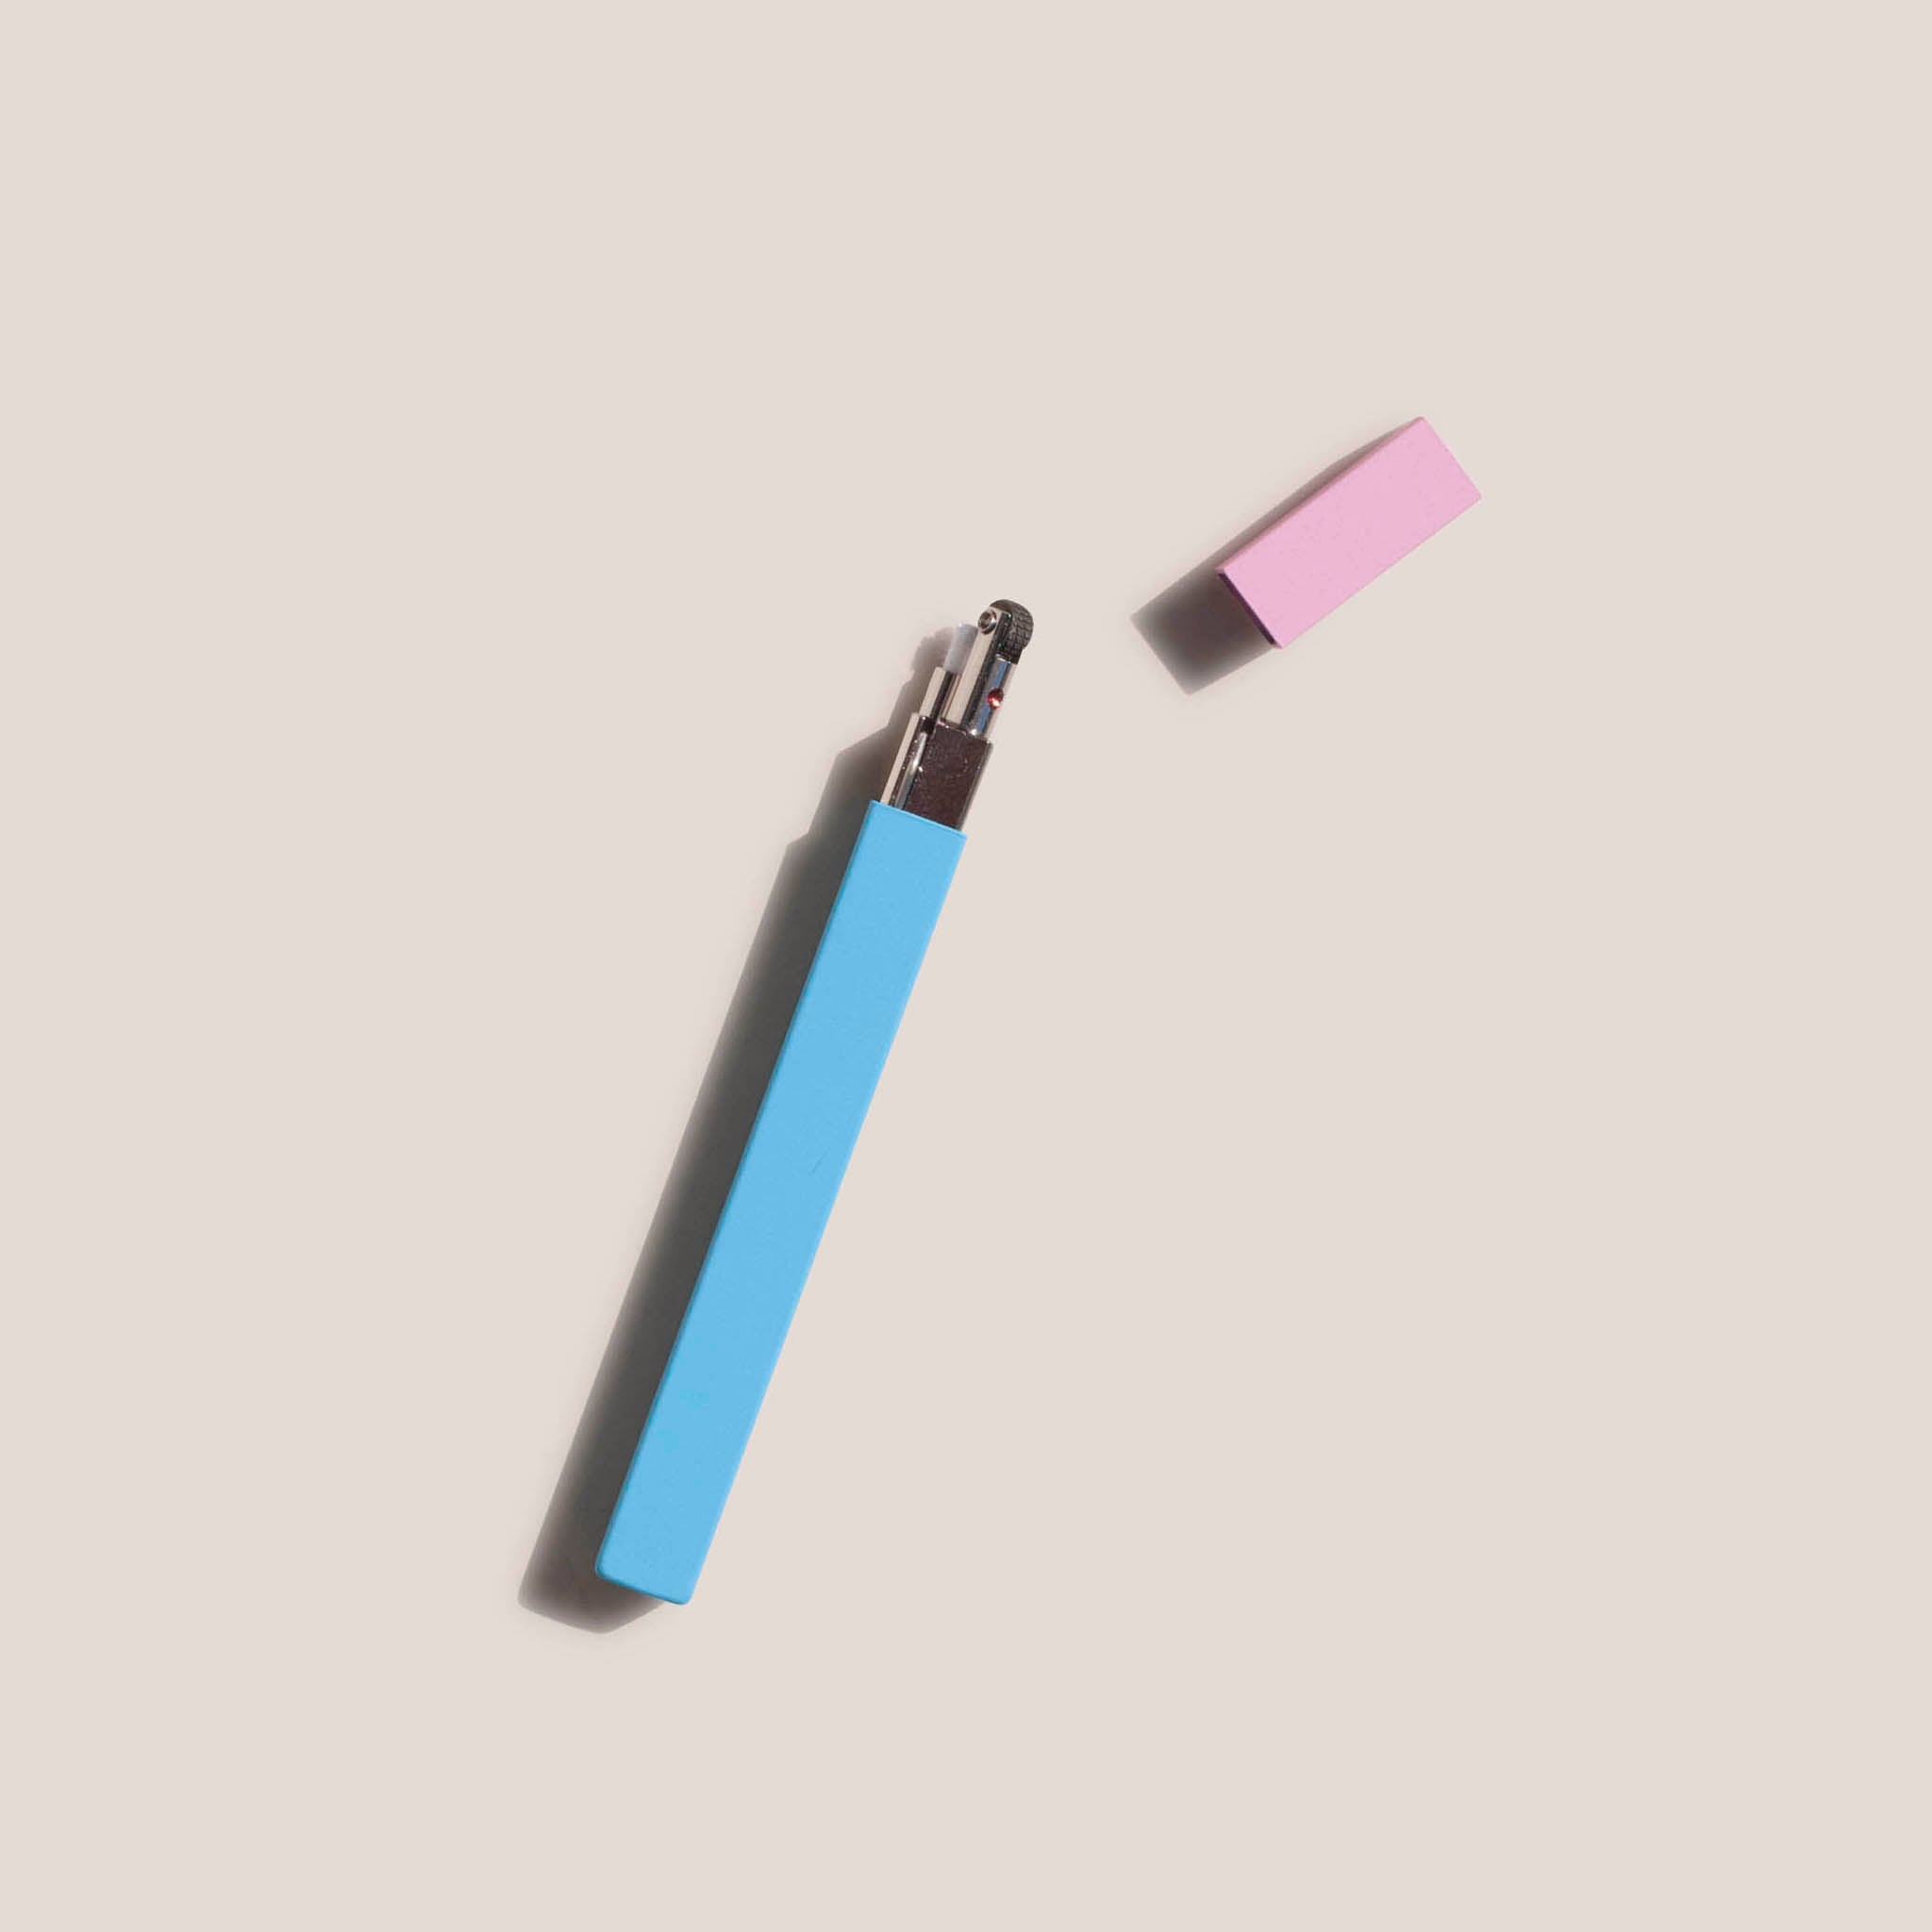 Tsubota Pearl - Queue Stick Lighter - Turquoise Pink, available at LCD.